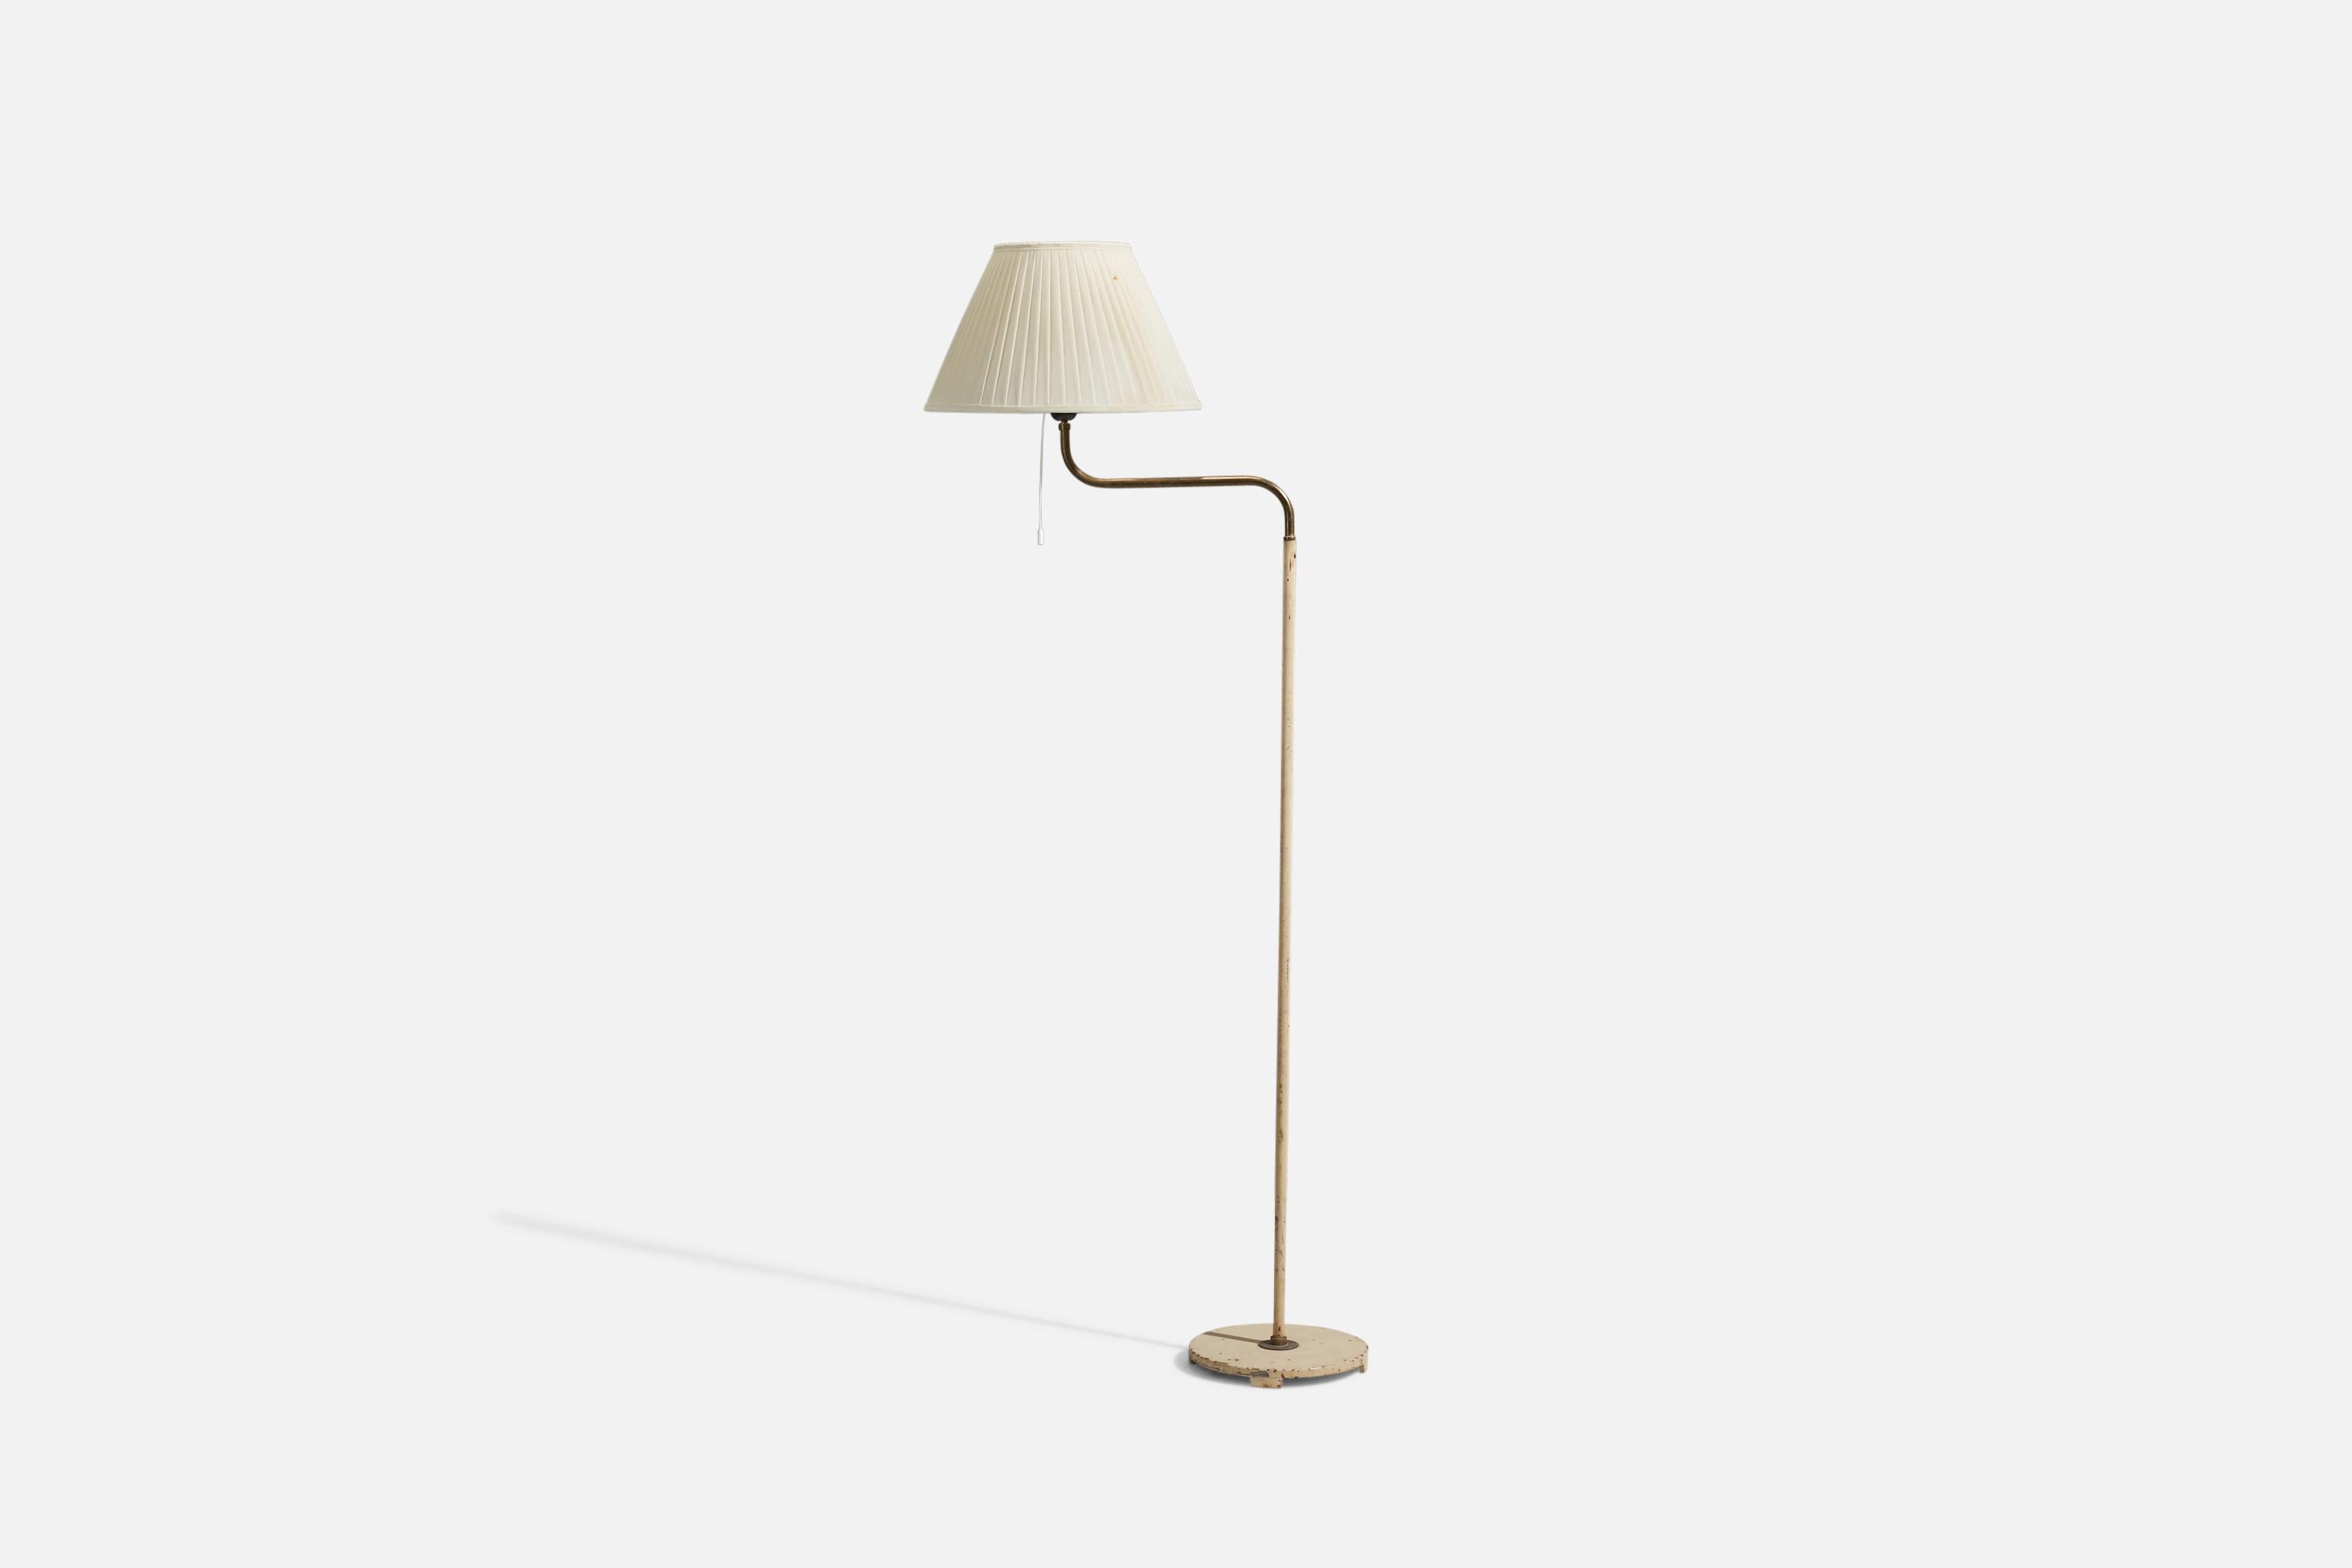 An adjustable brass, grey-lacquered metal and fabric floor lamp, designed and produced by ASEA, Sweden, 1940s.

Sold with Lampshade. Dimensions stated are of Floor Lamp with Lampshade. 

Socket takes standard E-26 medium base bulb.

There is no